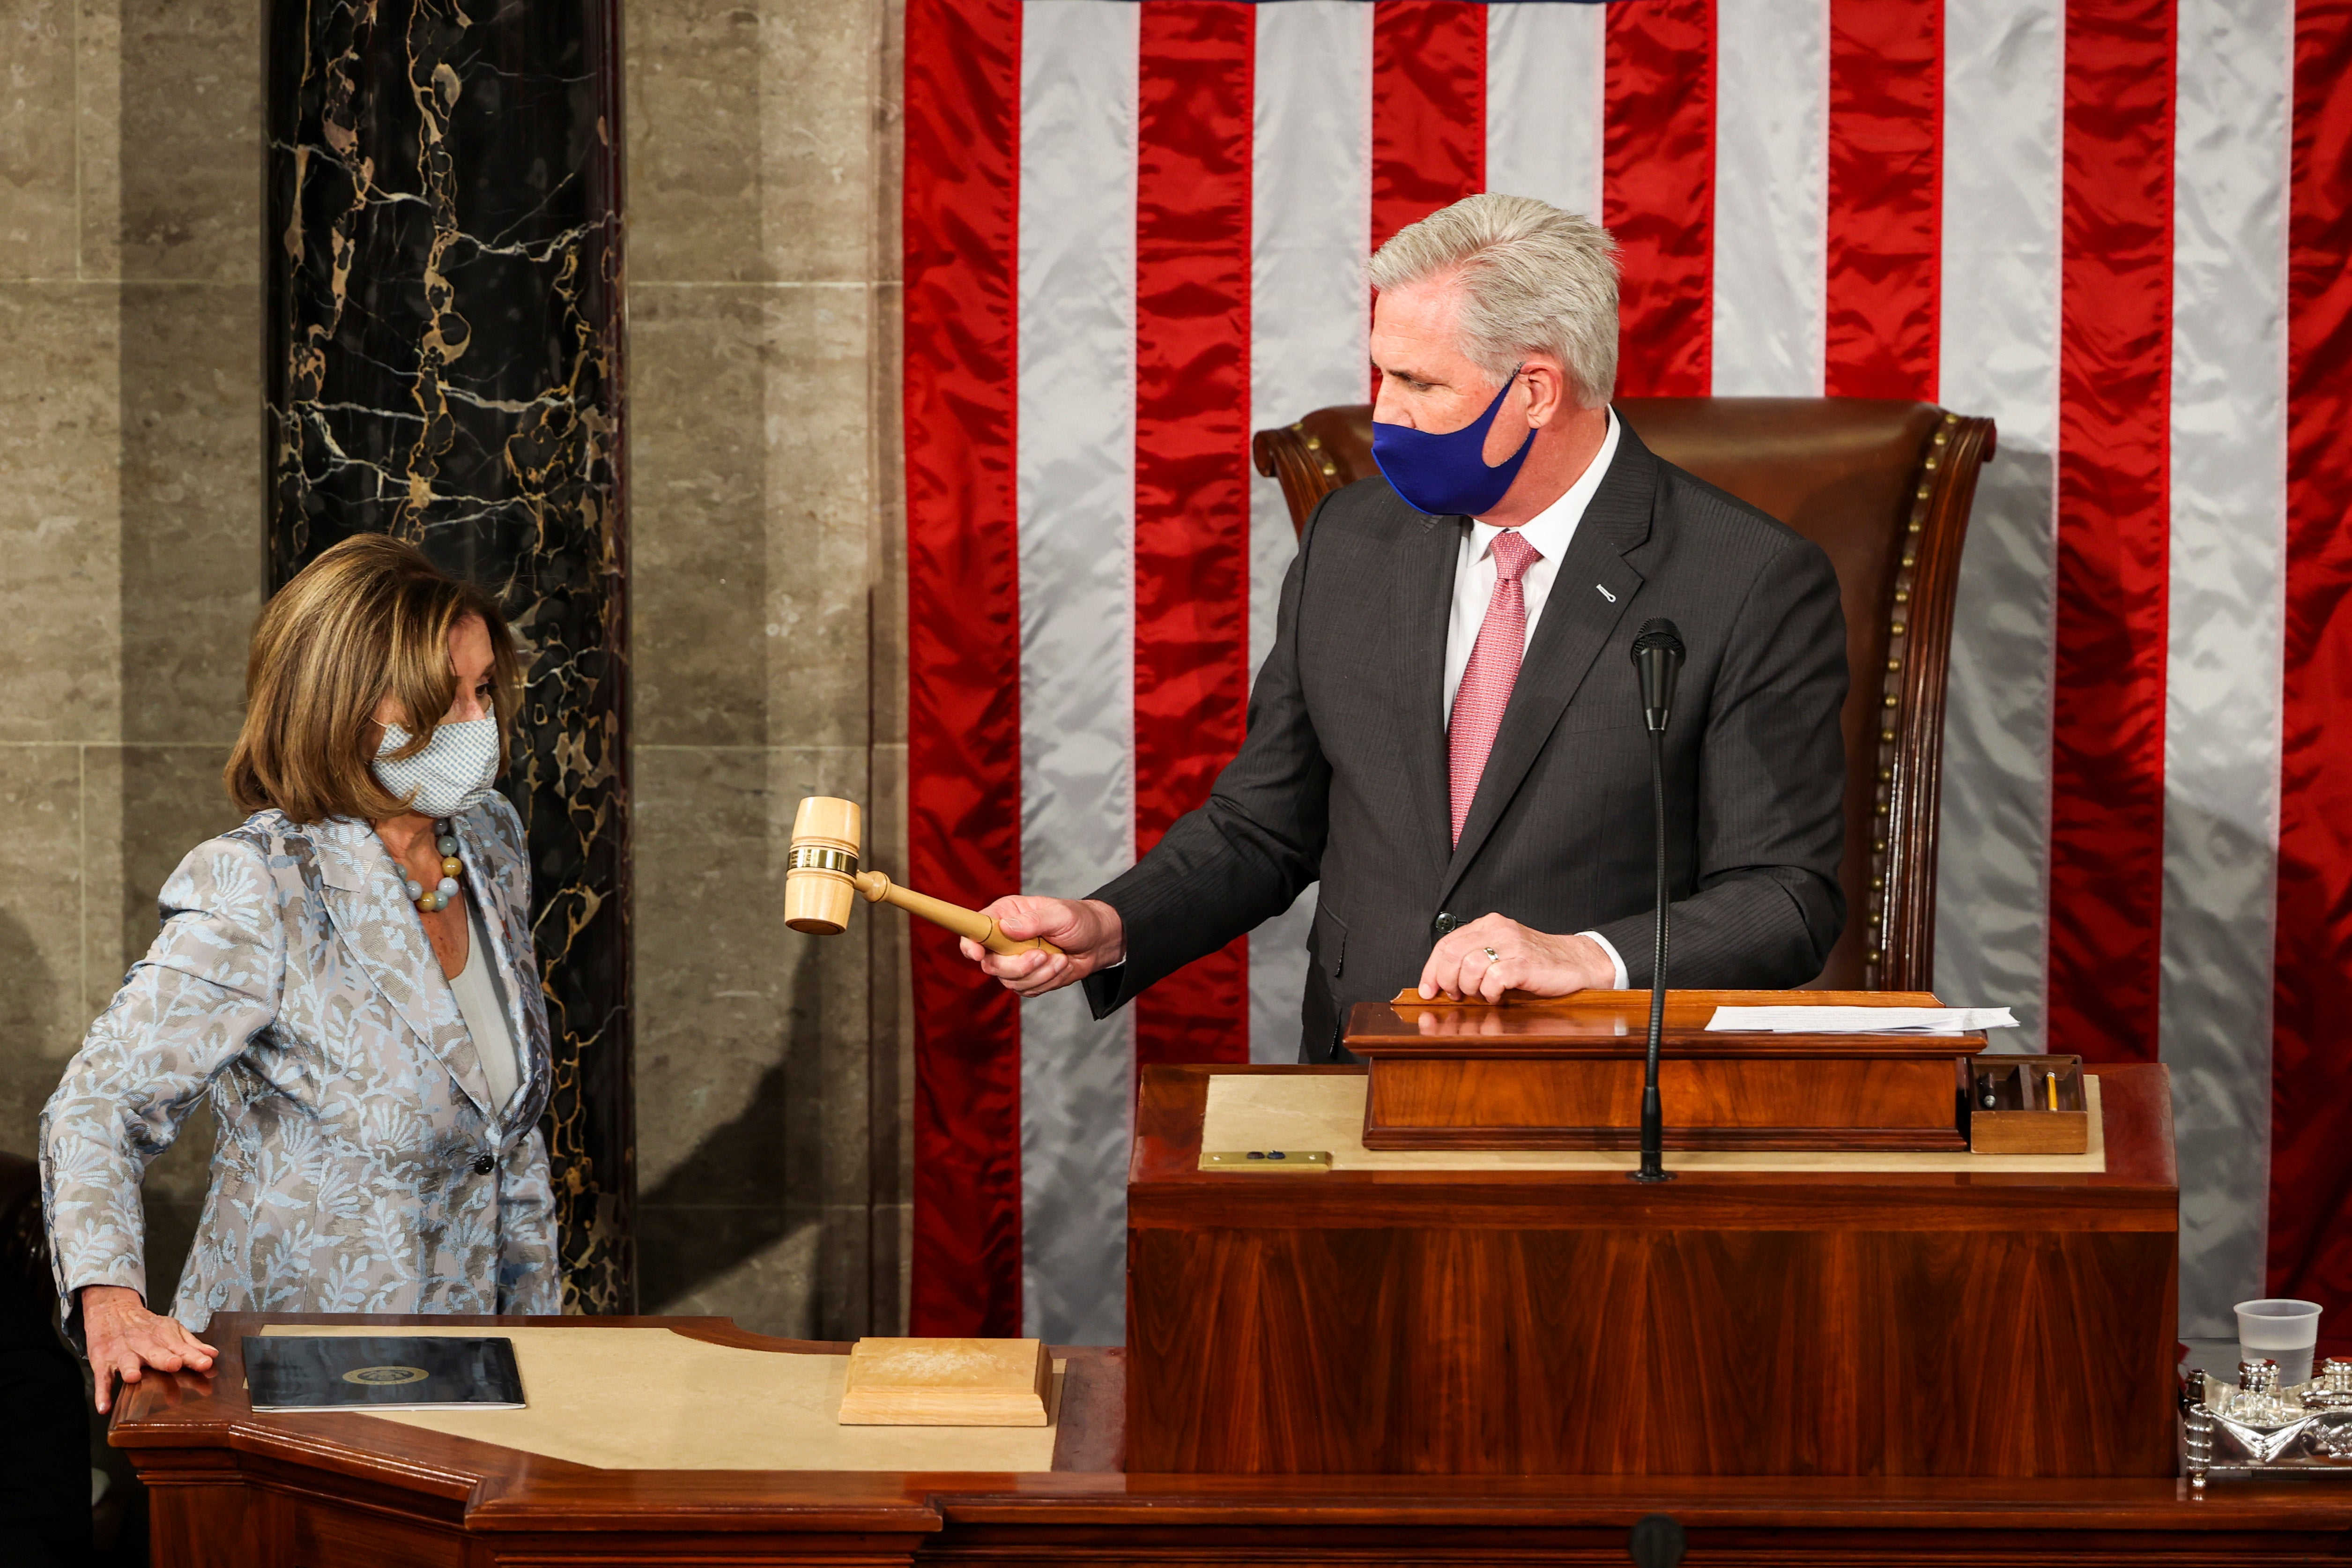 Kevin McCarthy is under fire after joking about hitting Nancy Pelosi with a gavel at a recent event in Tennessee.